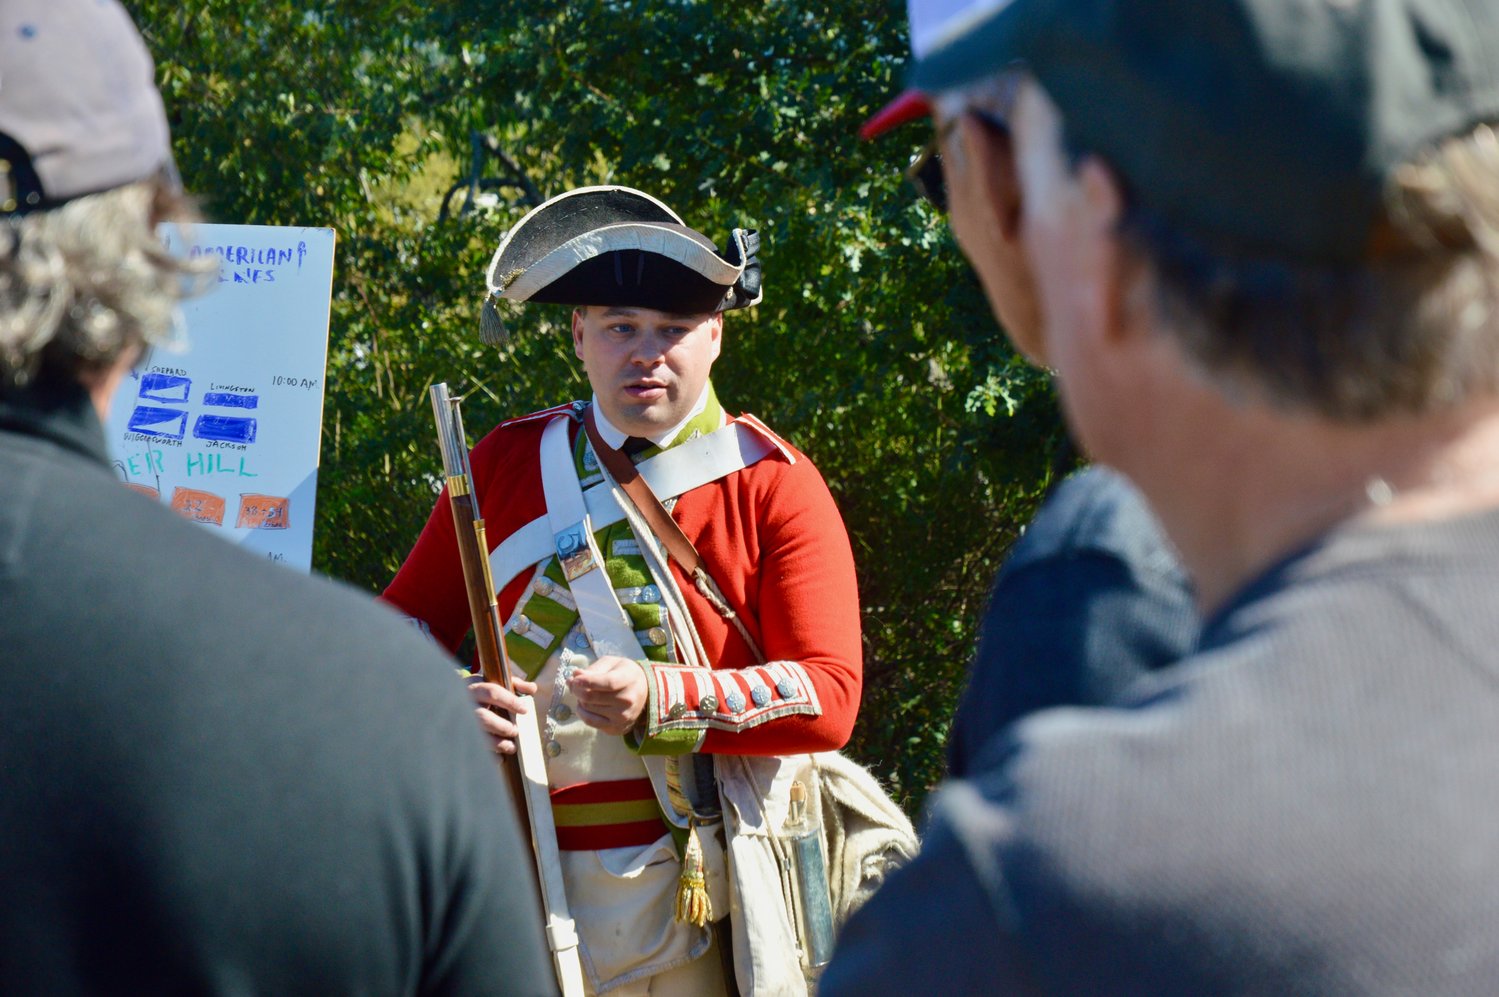 Seth Chiaro of Portsmouth, a member of the 54th Regiment of Foot, speaks with visitors to Heritage Park. Chiaro is involved in efforts to restore Butts Hill Fort, located further north.